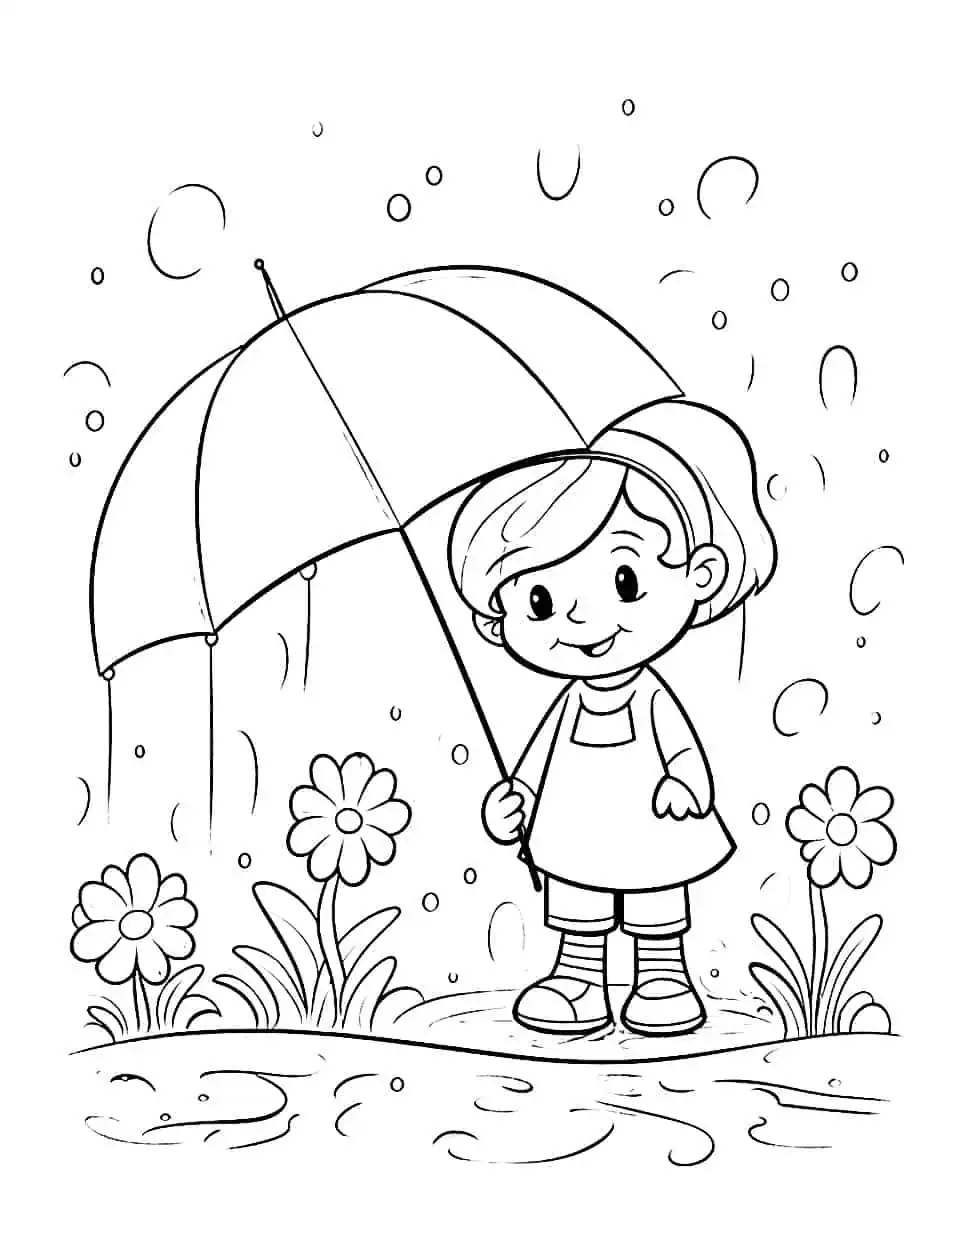 Rainy Spring Day Coloring Page - A coloring page of kids playing and splashing in spring rain puddles.